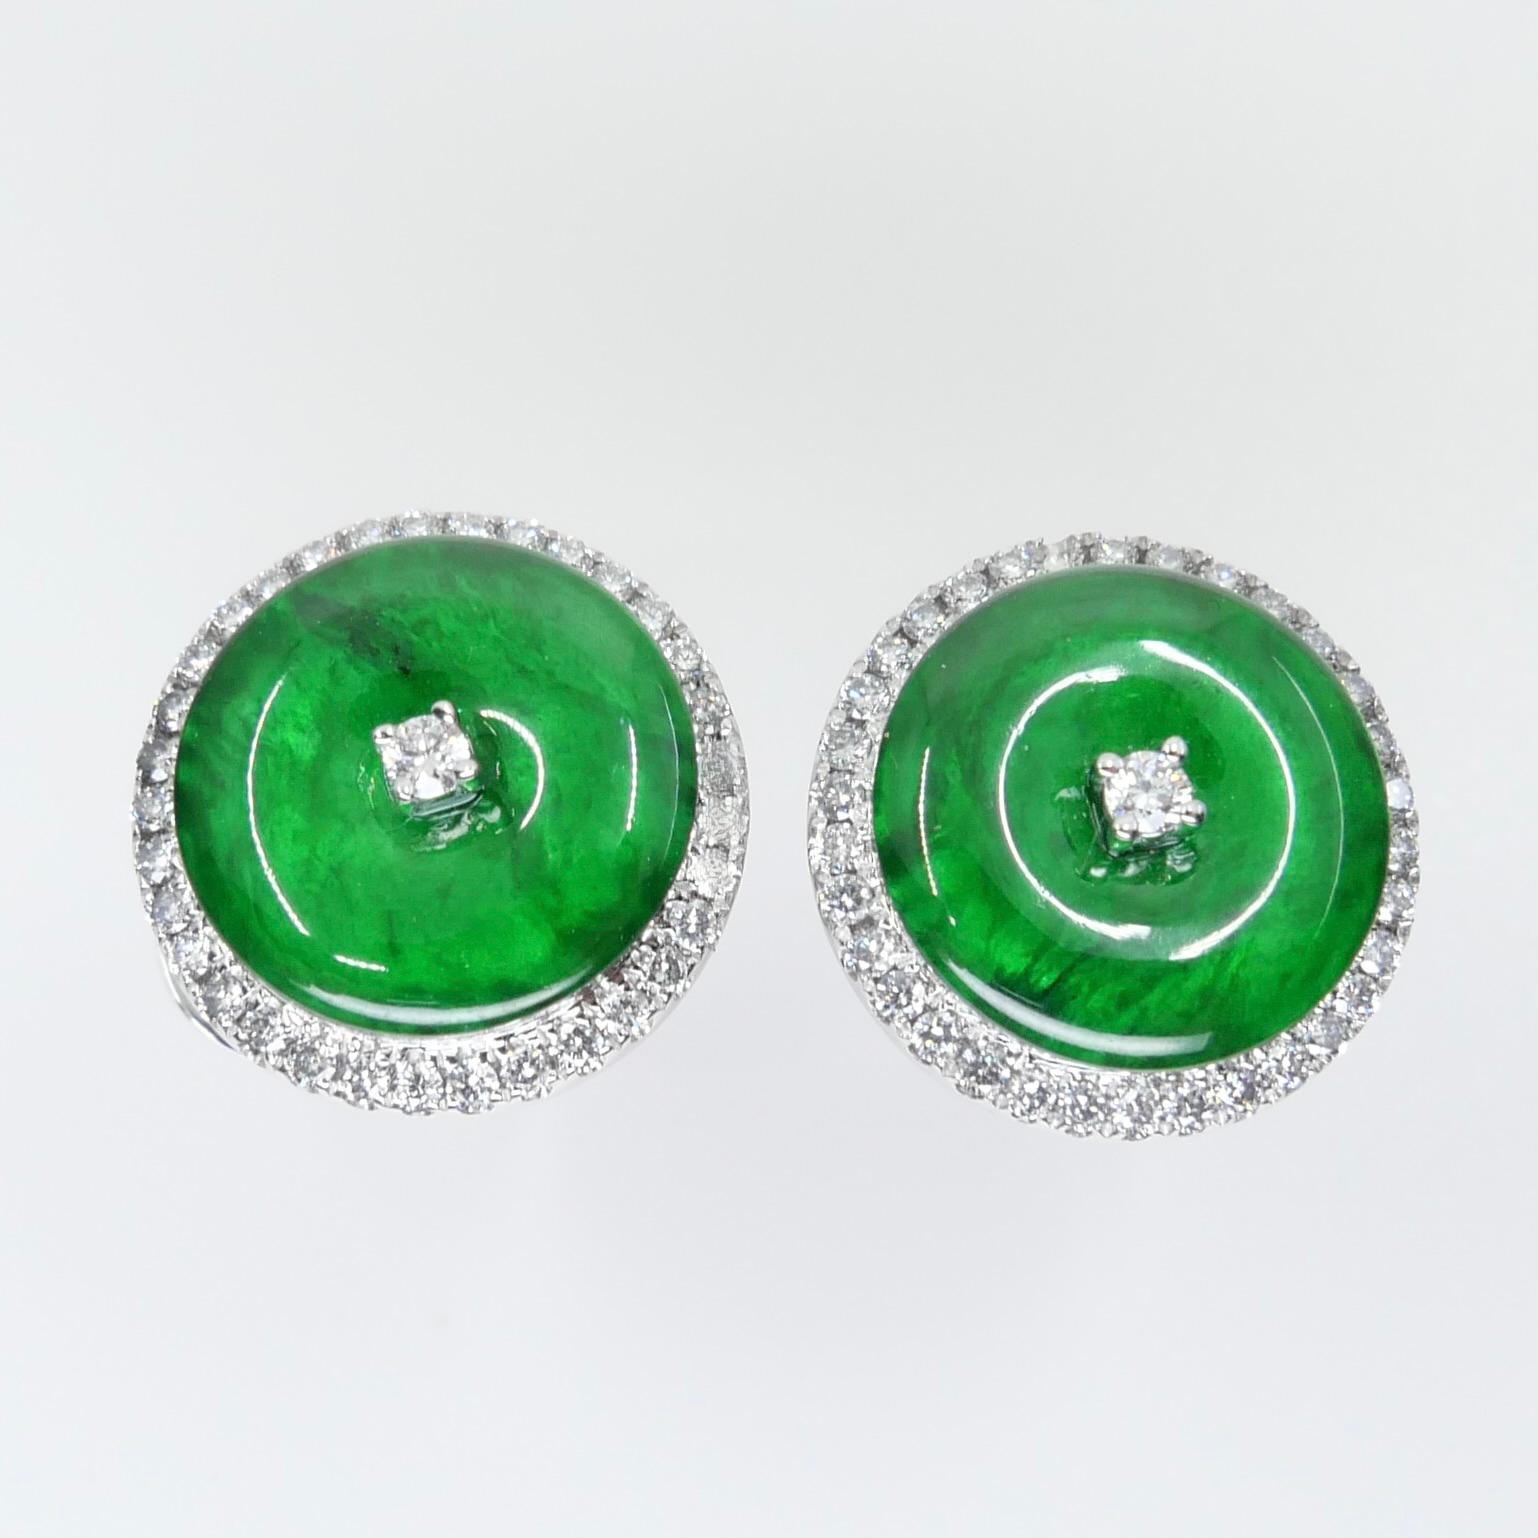 Certified Natural Type A Jadeite Jade And Diamond Earrings. Apple Green Color For Sale 5